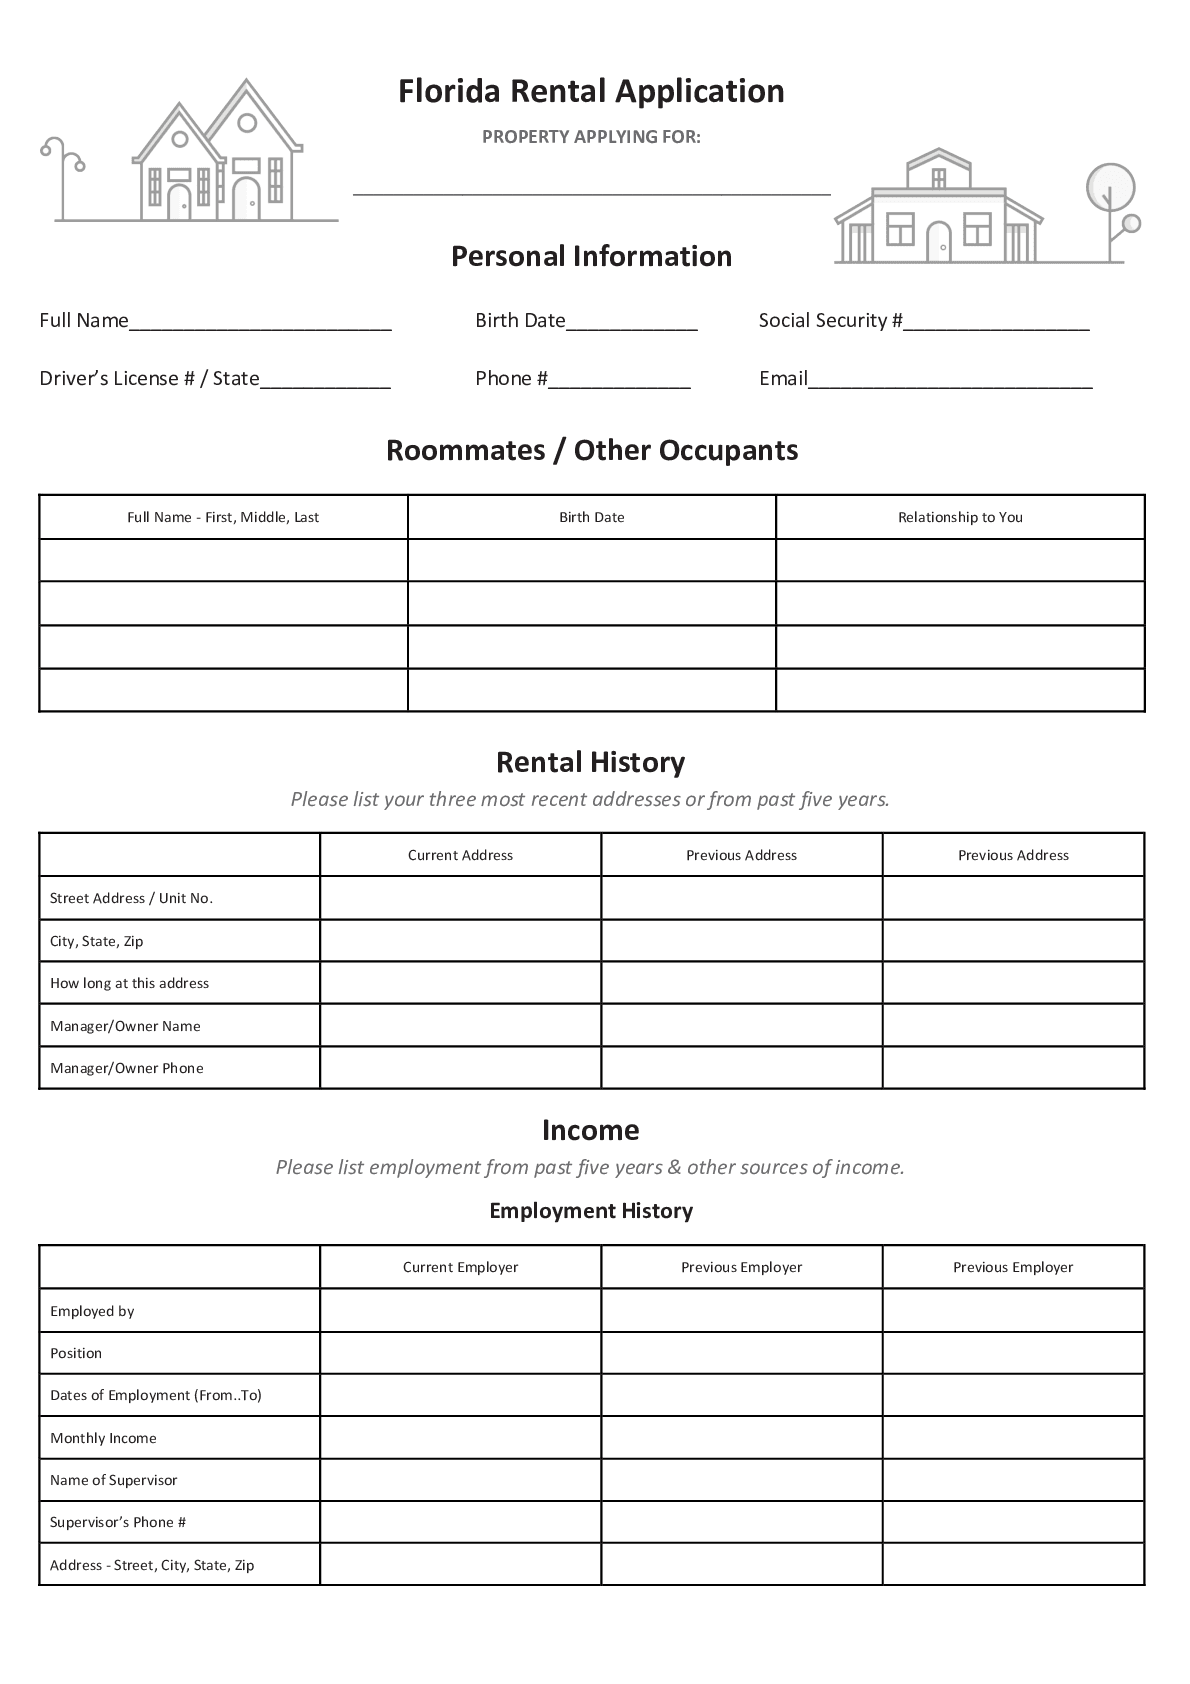 House Rental Application Template from ipropertymanagement.com